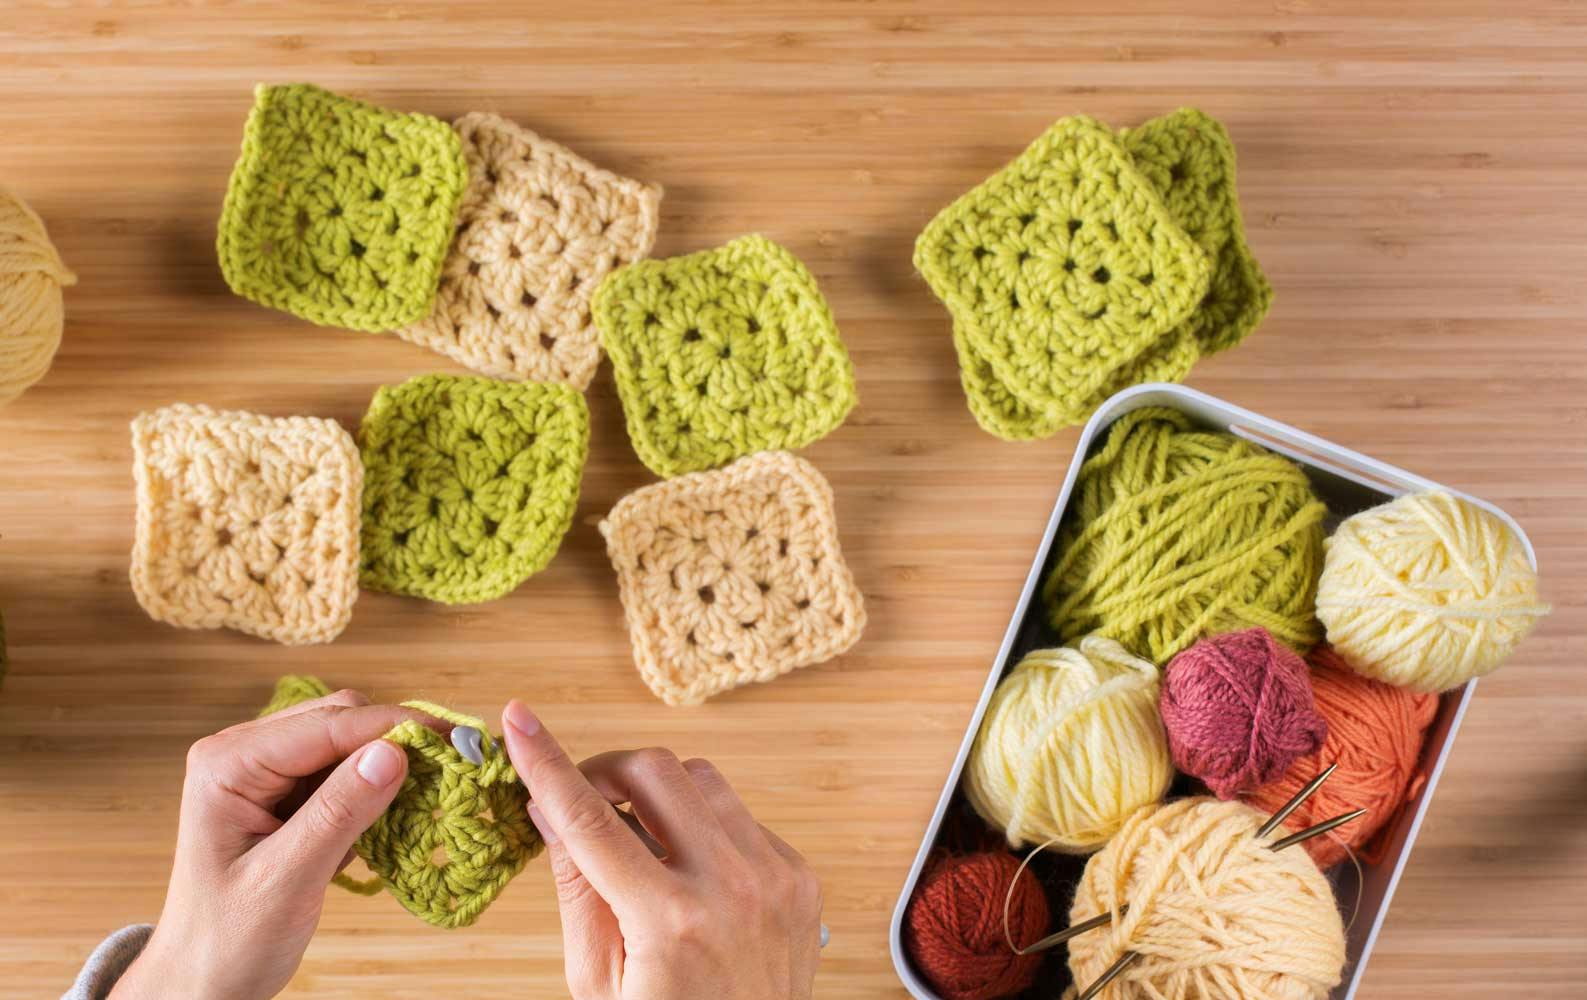  crochet squares used to make a crochet bucket hat